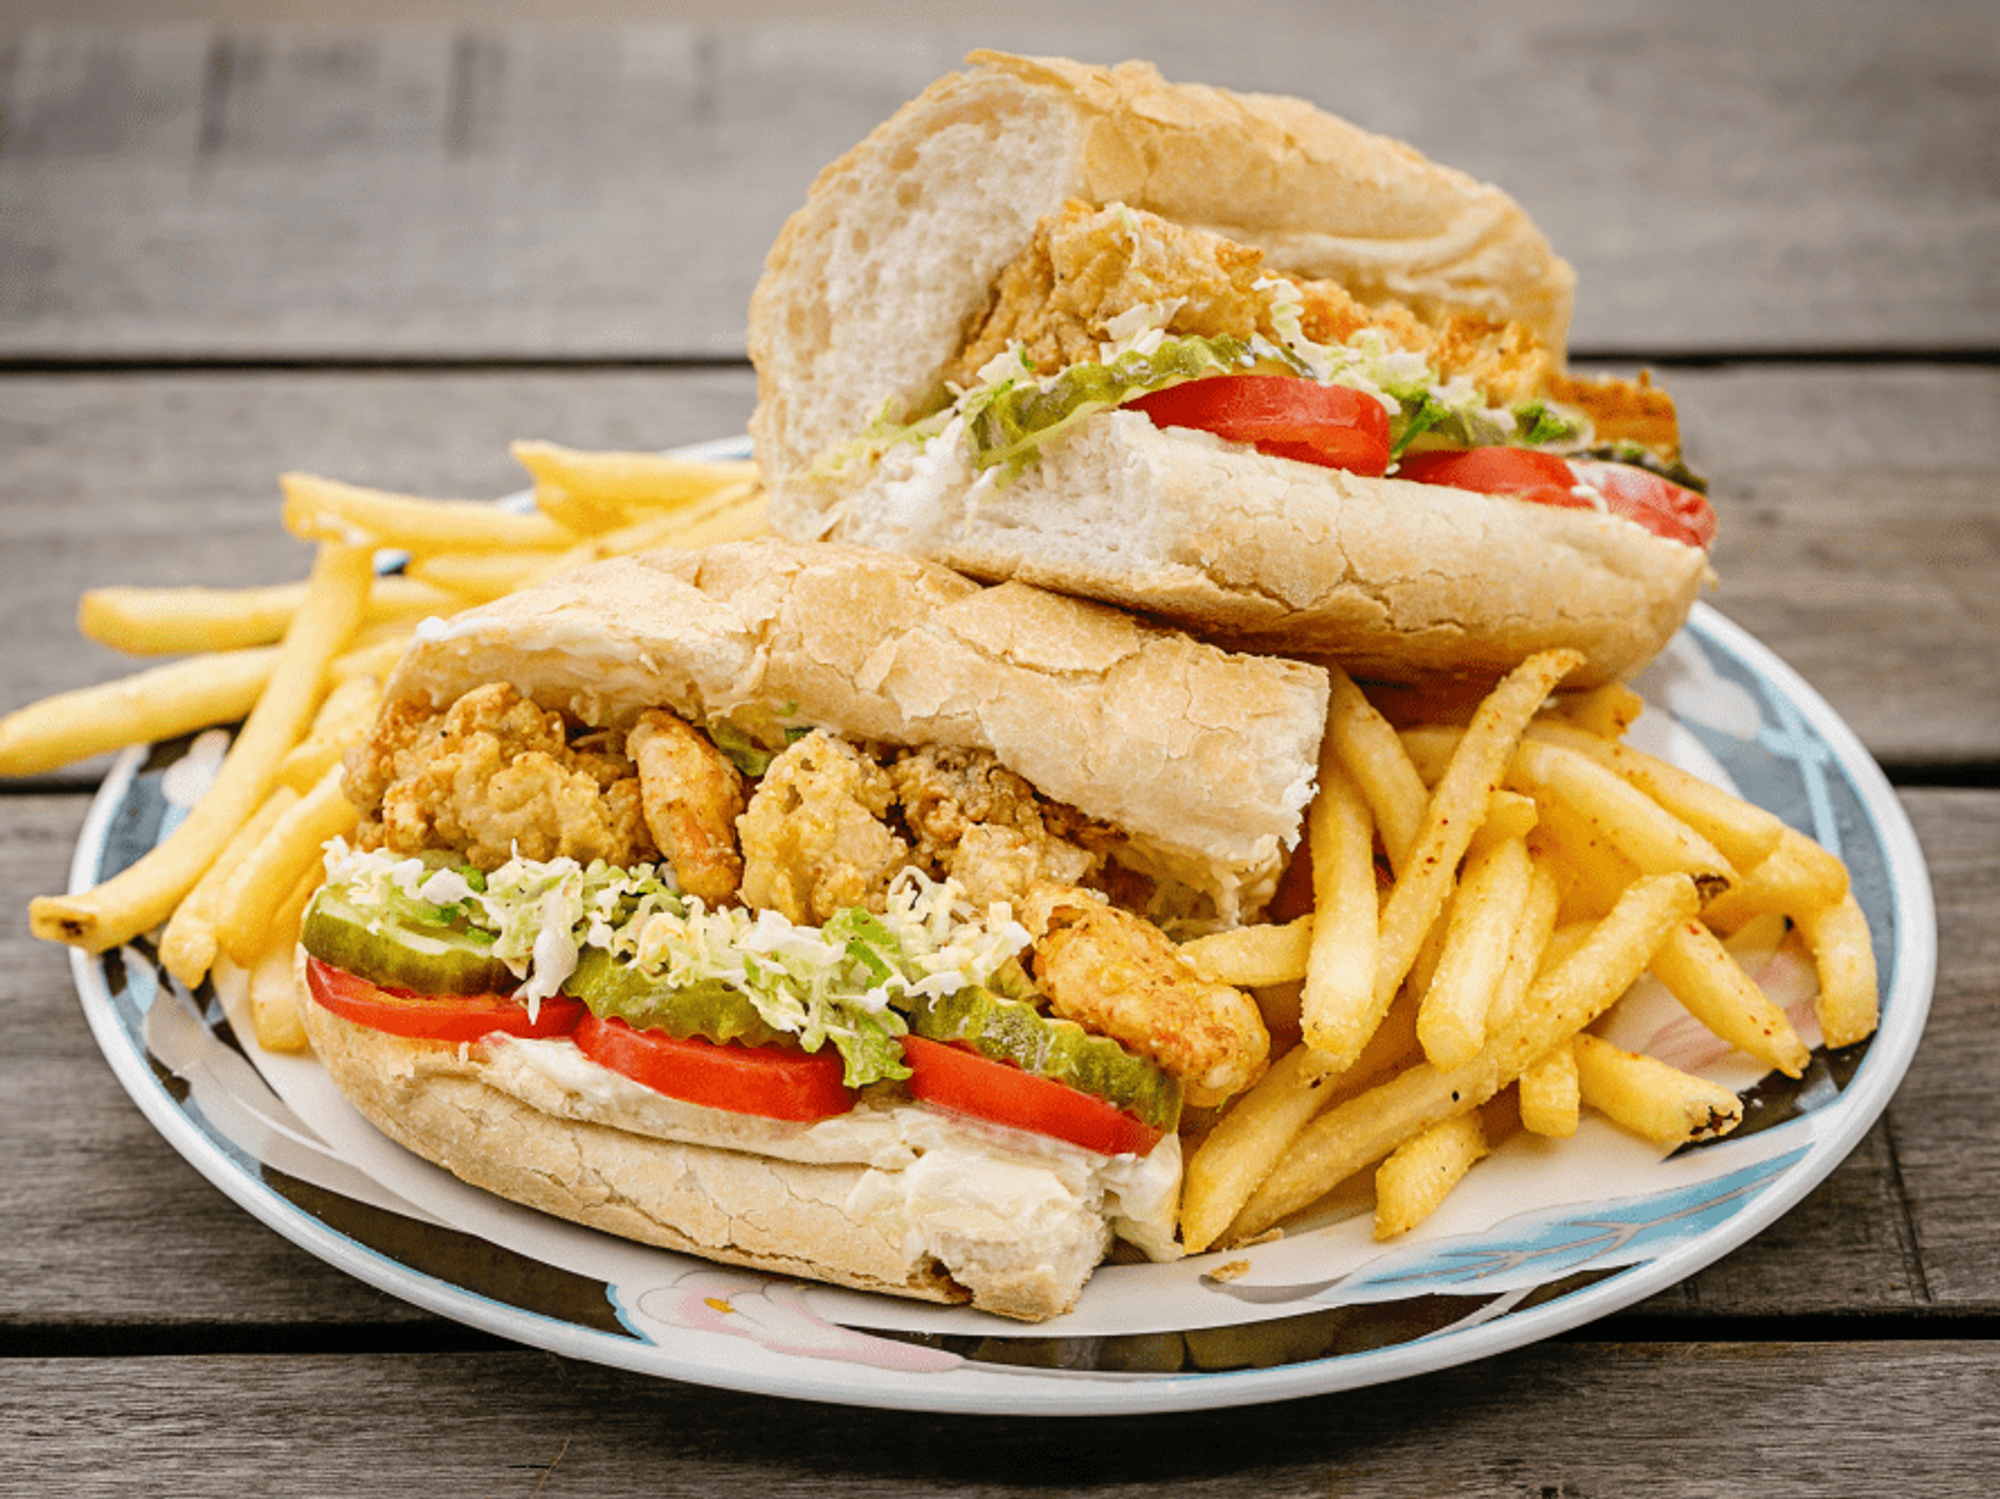 The classic Peacemaker po' boy.